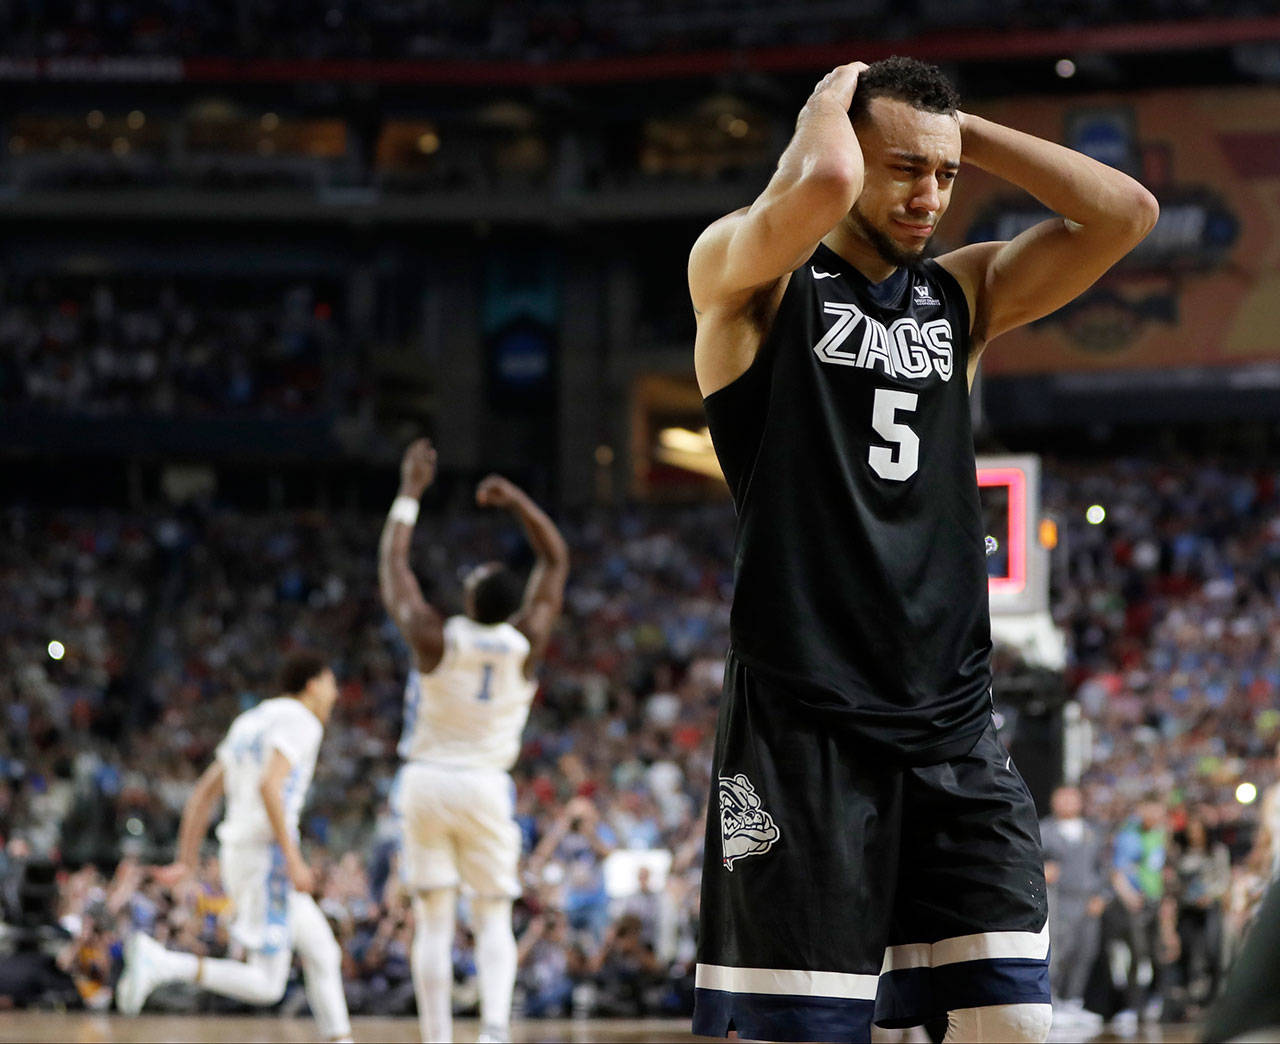 Gonzaga’s Nigel Williams-Goss (5) reacts after the final whistle of the NCAA championship game against North Carolina on April 3, 2017, in Glendale, Ariz. (AP Photo/Mark Humphrey)